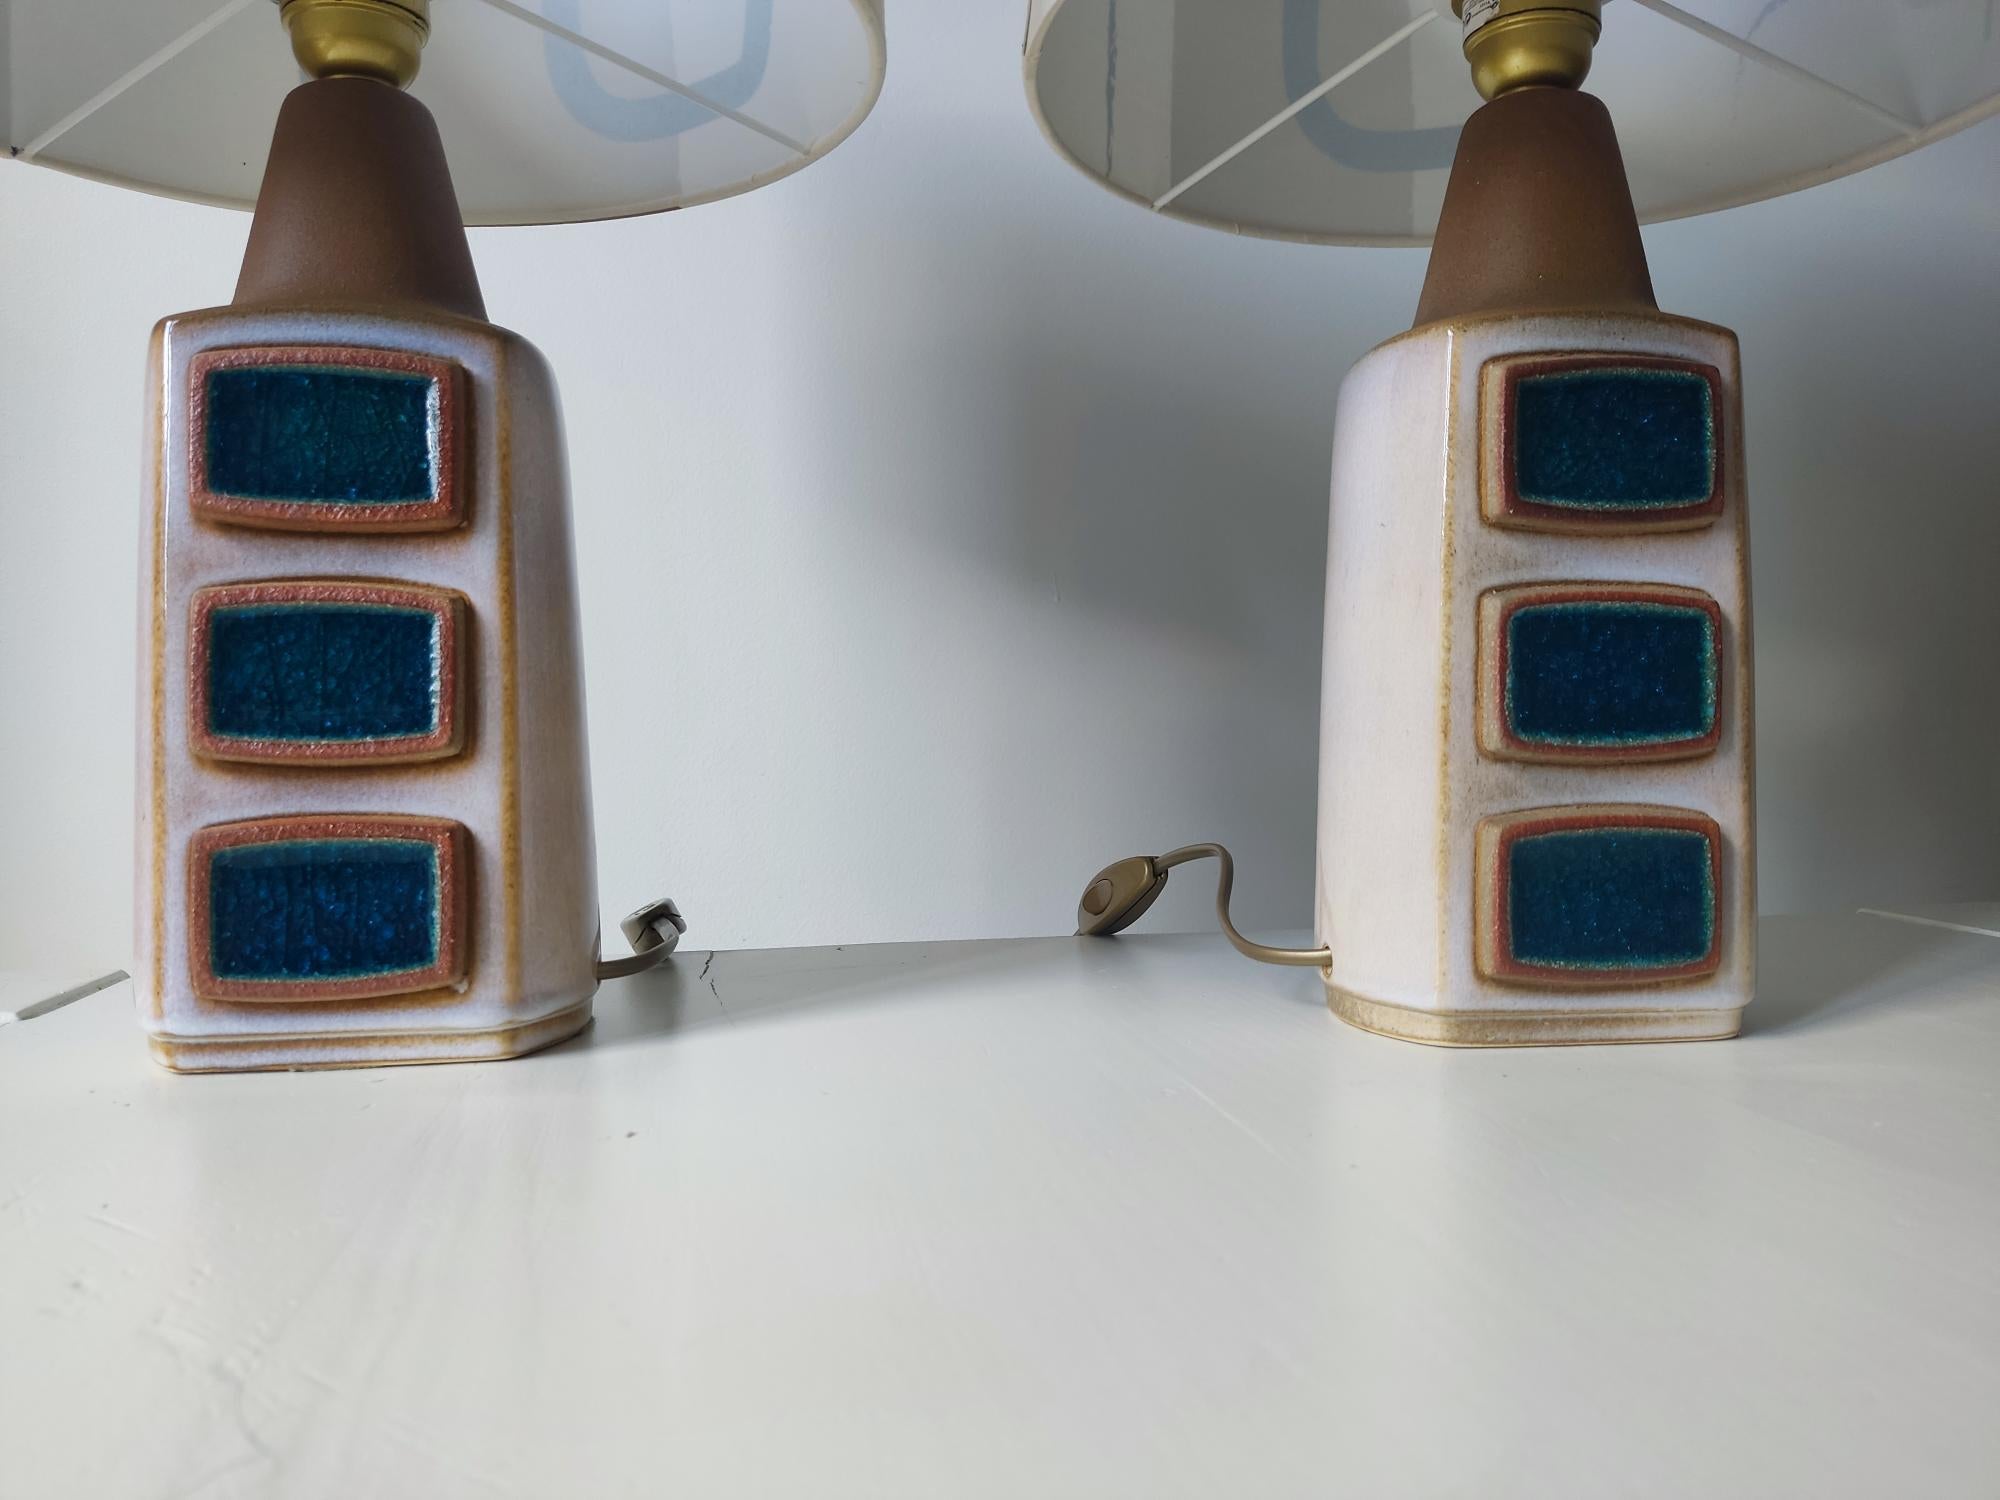 This beautiful pair is in excellent condition with no damage.

Made in Denmark, the base features a beautiful blue enamel over a pattern of three rectangles on the front and back, creating a contrast with the more brown surroundings.

The piece is